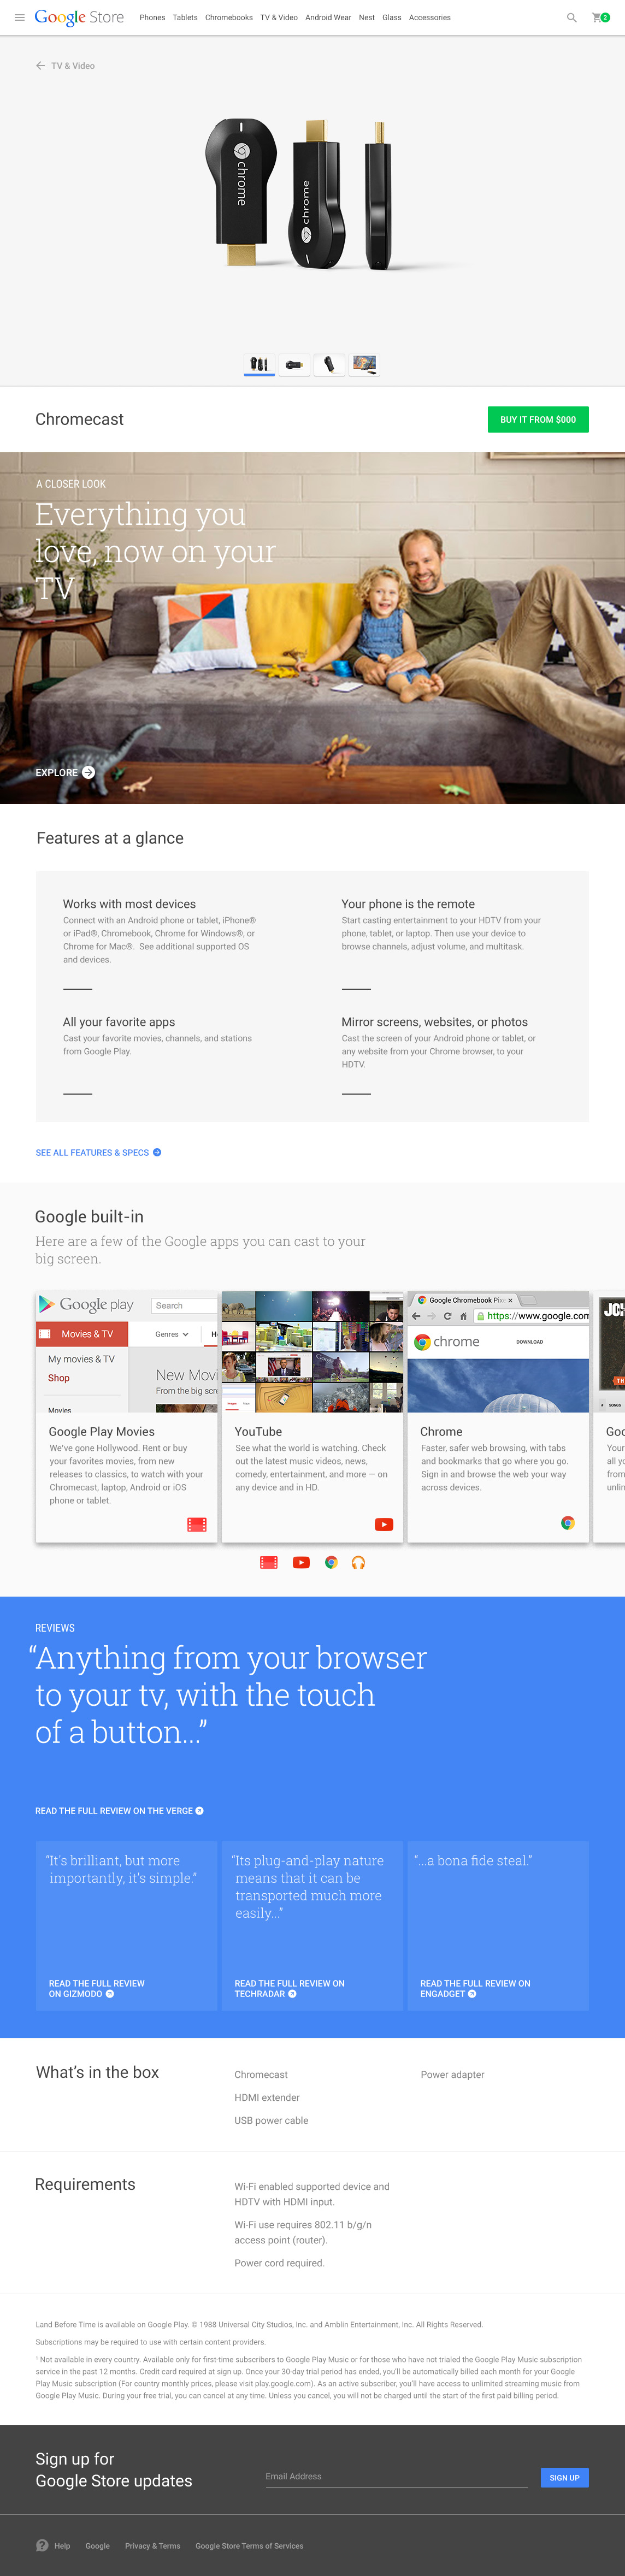 Chromecast Hero Product Detail Page